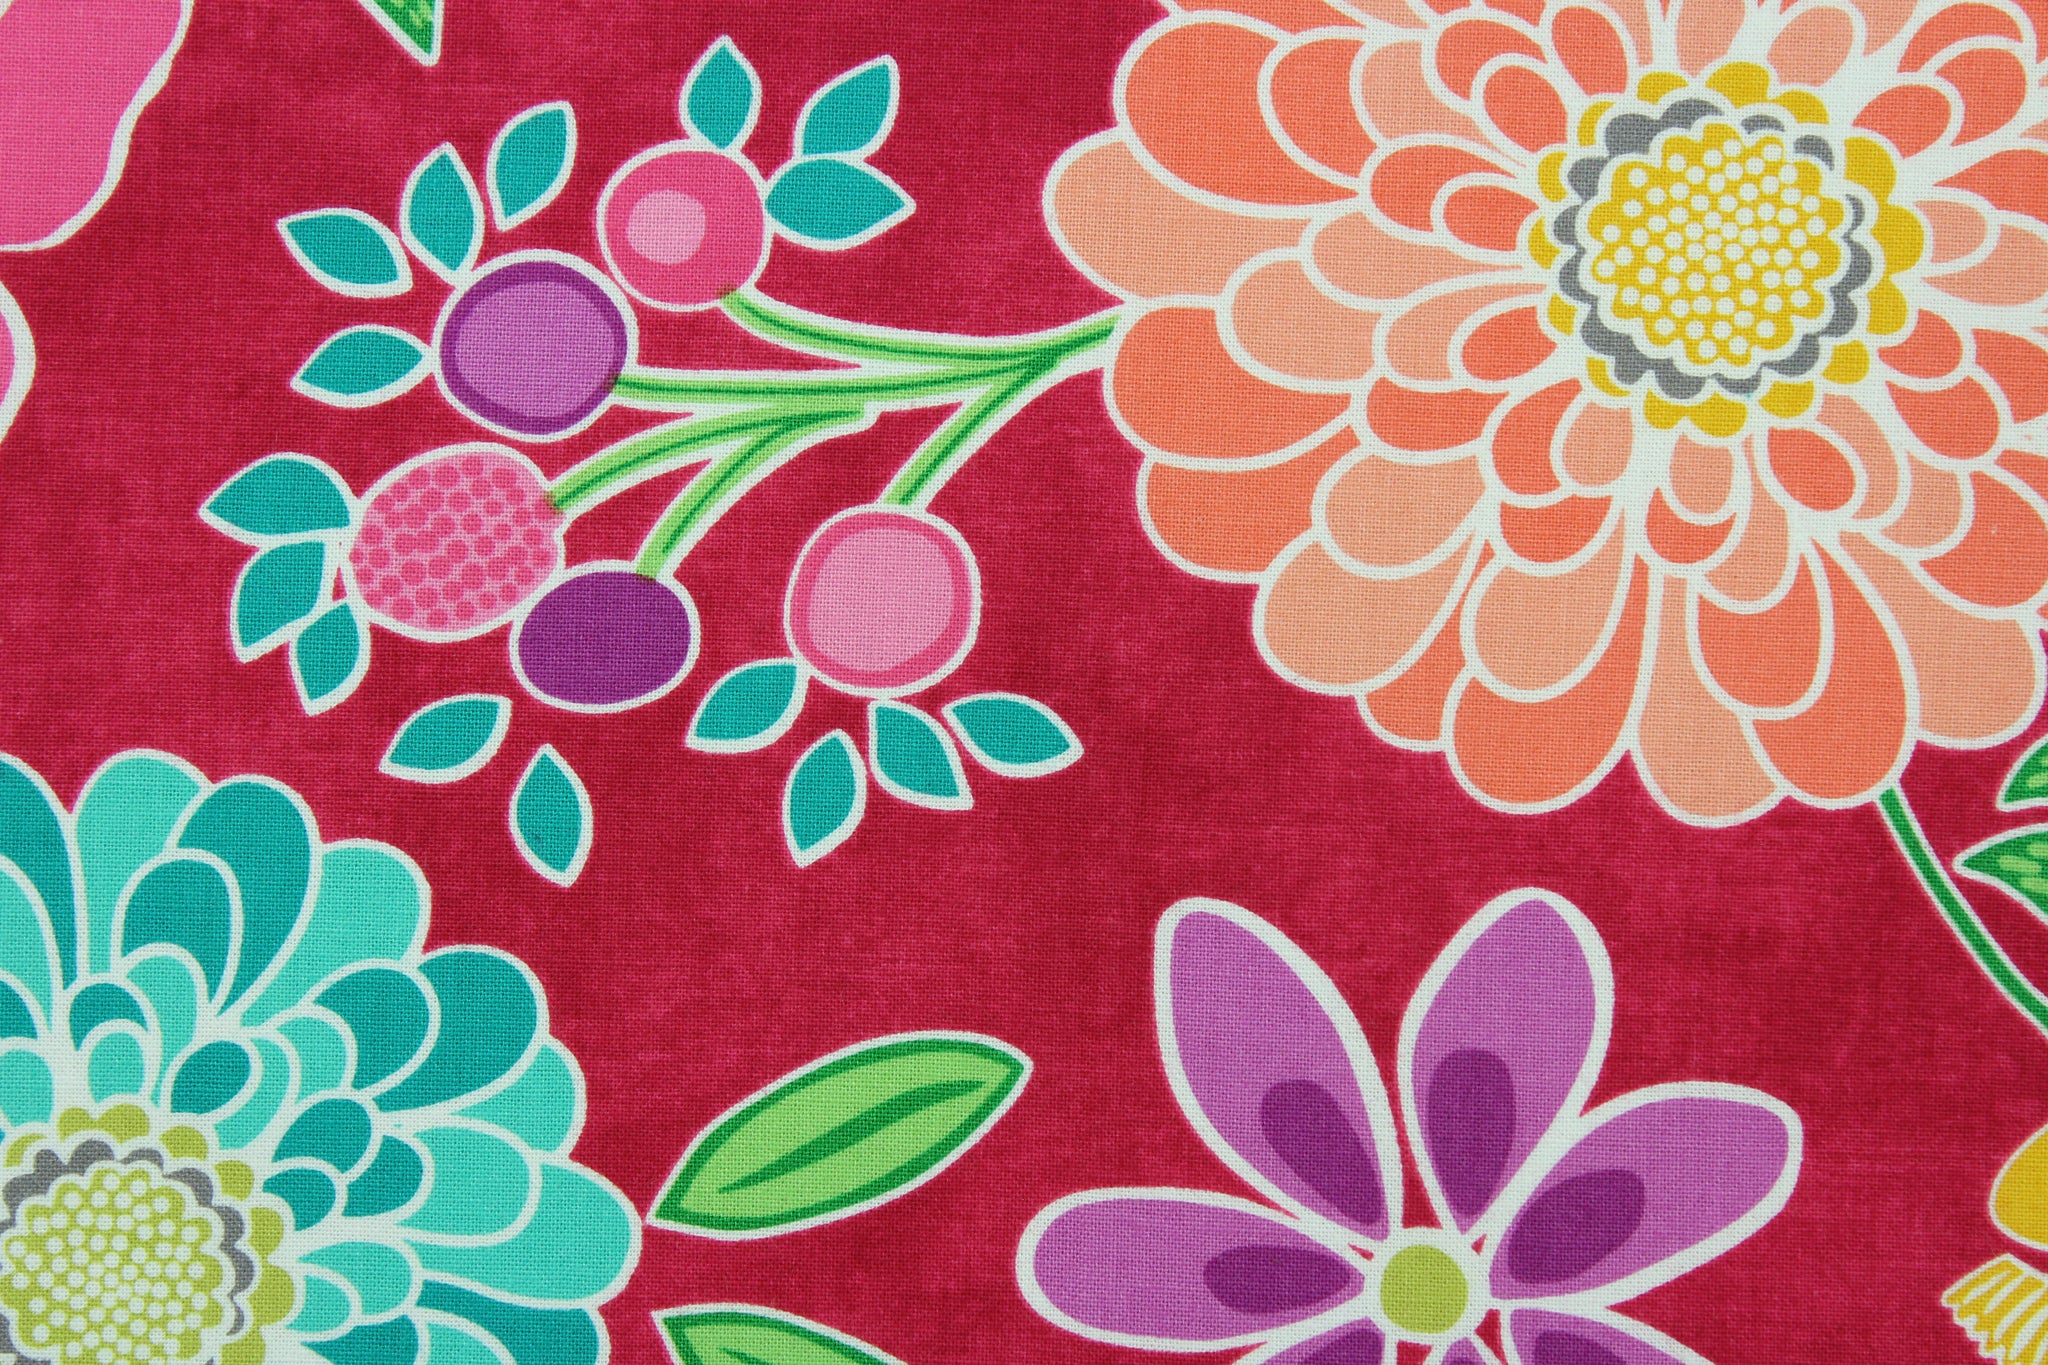 Benartex© Sew Bloom Large Floral in Fuchsia - All About Fabrics